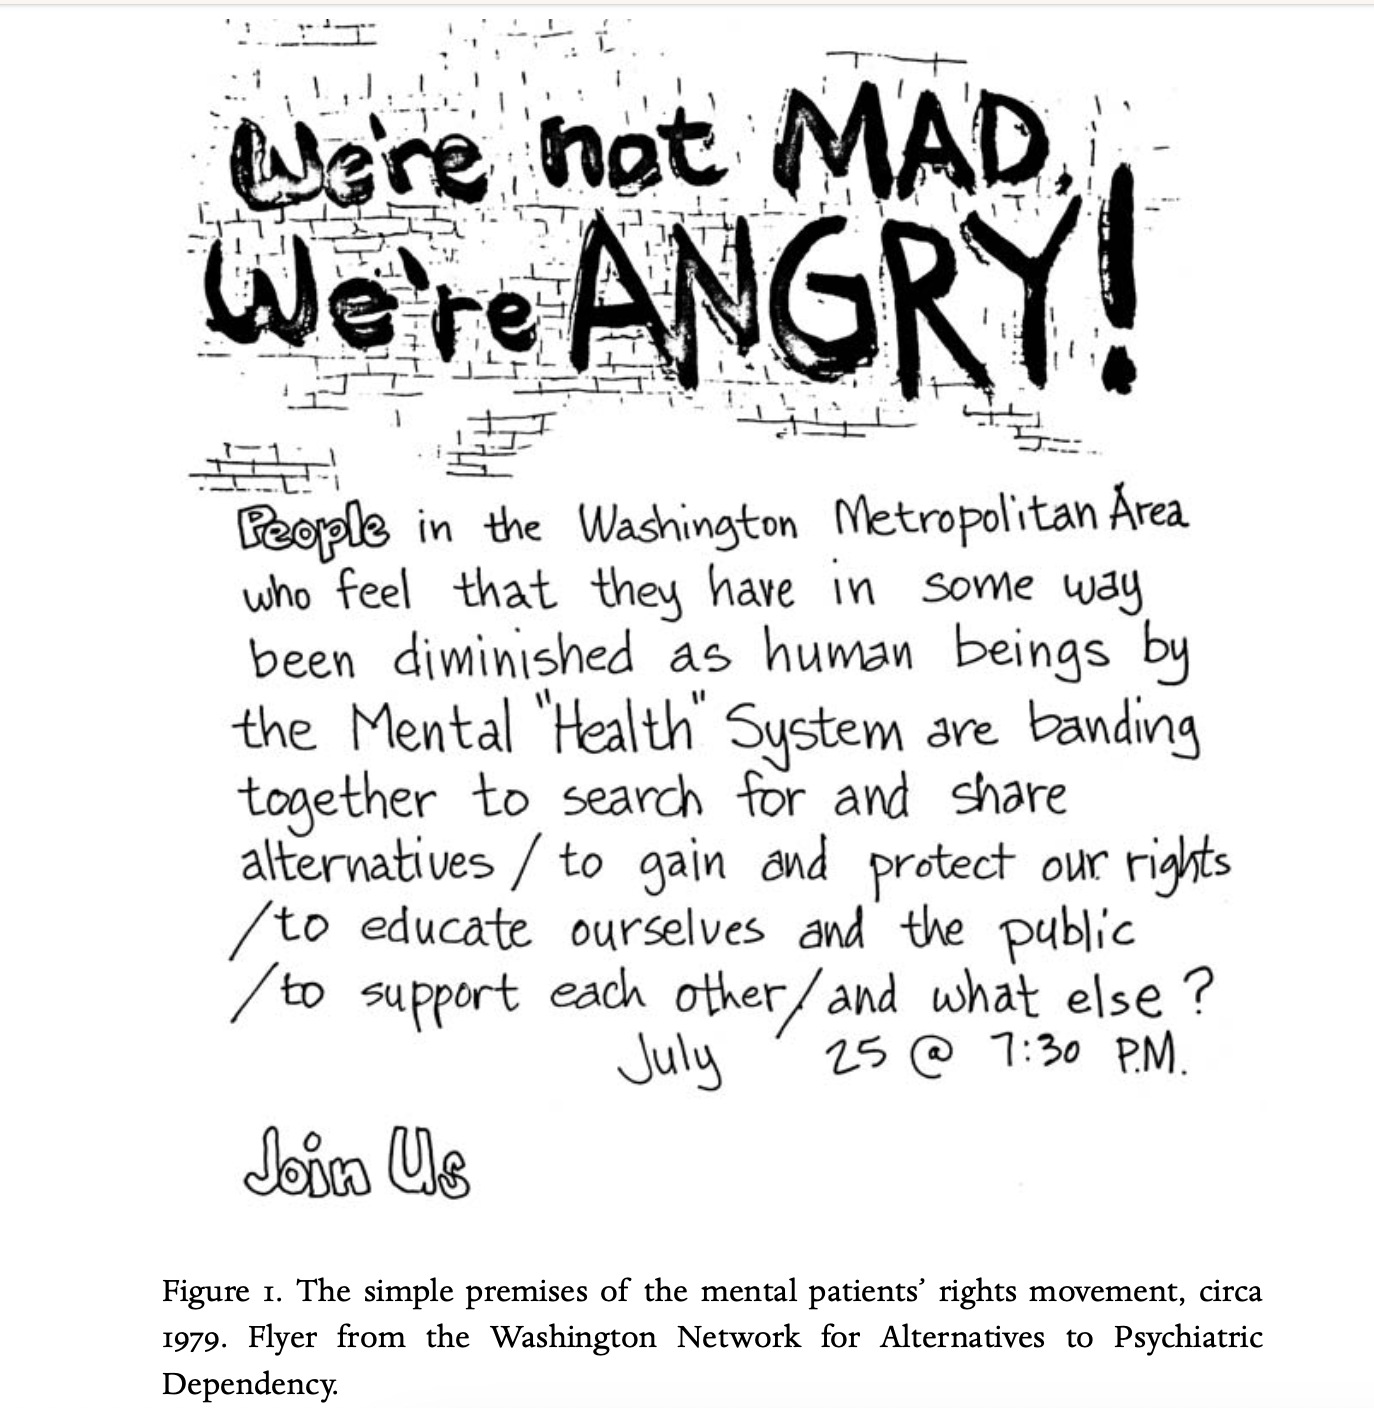 Image of a flyer that reads   “We’re not MAD, We’re Angry” in black handwritten letters   And below that, in handwritten print:    “People in the Washington Metropolitan area who feel that they have in some way been diminished as human being by the Mental “Health” System are banding together to search for and share alternatives / to gain and protect our rights / to educate ourselves and the public / to support each other / and what else?”   Below that, “July 25 @ 7:39 PM  And the words “Join us”   With the caption “Figure I. The simple premises of the mental patients’ rights movement, circa 1979. Flyer from the Washington Network for Alternatives to Psychiatric Dependency.”